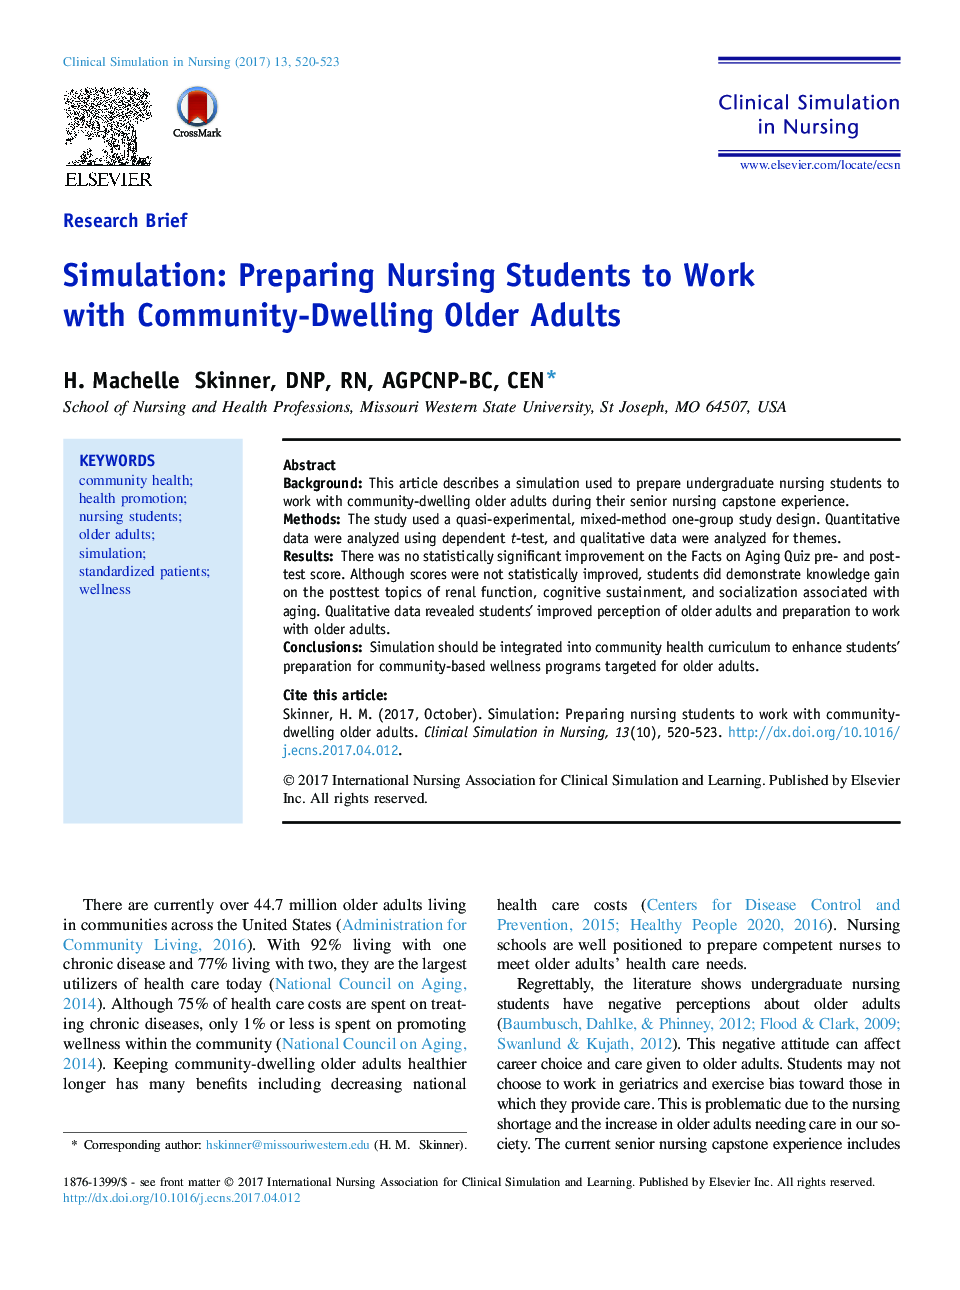 Simulation: Preparing Nursing Students to Work with Community-Dwelling Older Adults